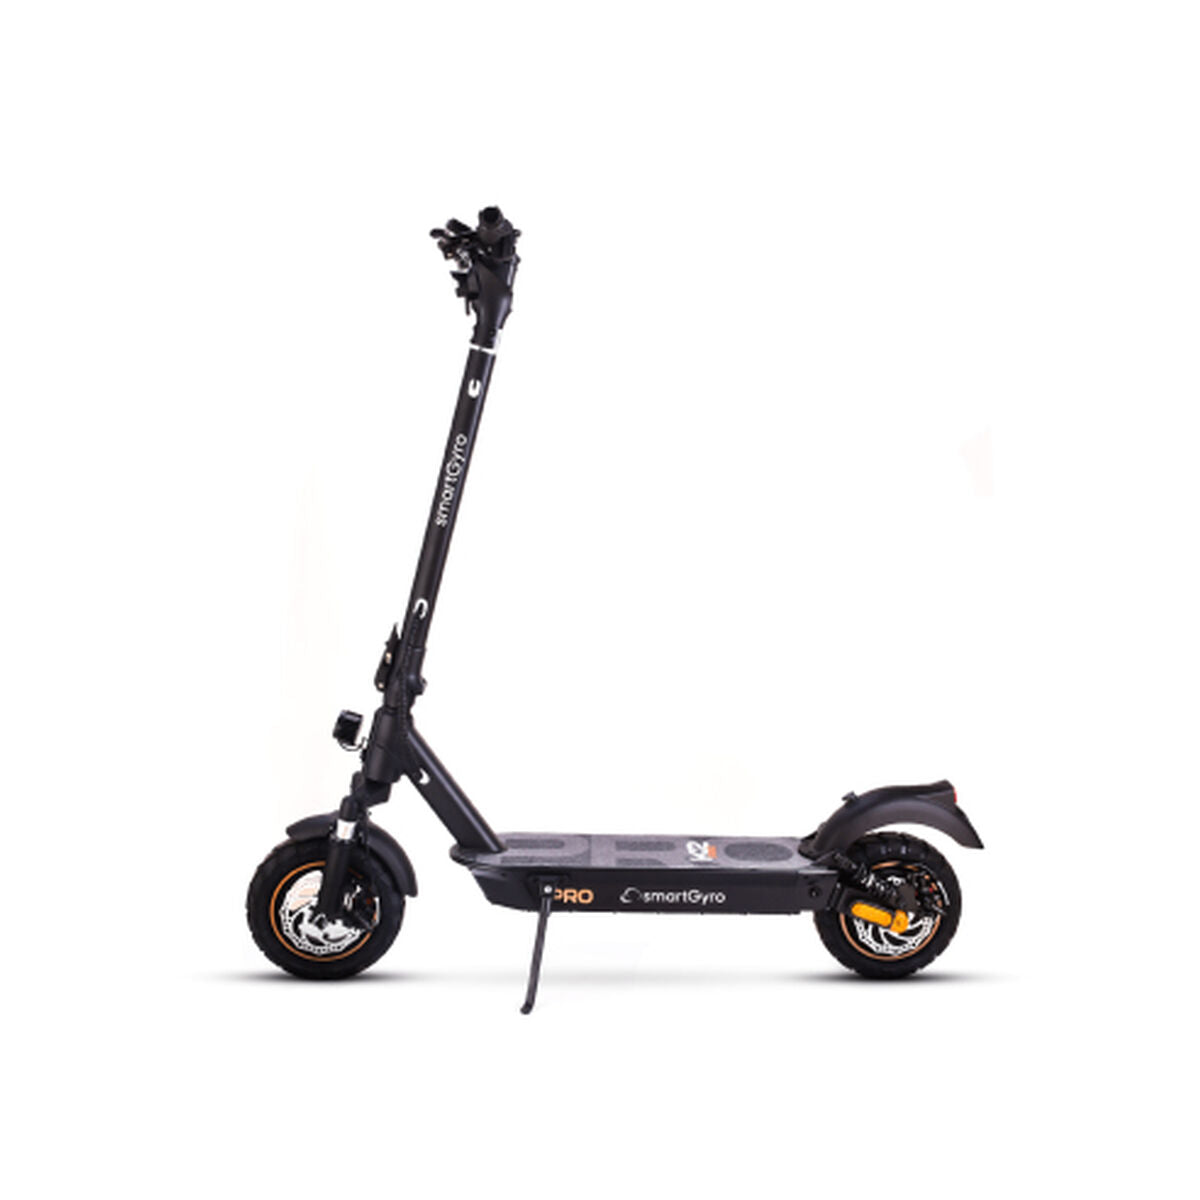 Electric Scooter Smartgyro Black, Smartgyro, Sports and outdoors, Urban mobility, electric-scooter-smartgyro-black, Brand_Smartgyro, category-reference-2609, category-reference-2629, category-reference-2904, category-reference-t-19681, category-reference-t-19756, category-reference-t-19876, category-reference-t-21245, category-reference-t-25387, Condition_NEW, deportista / en forma, Price_700 - 800, RiotNook